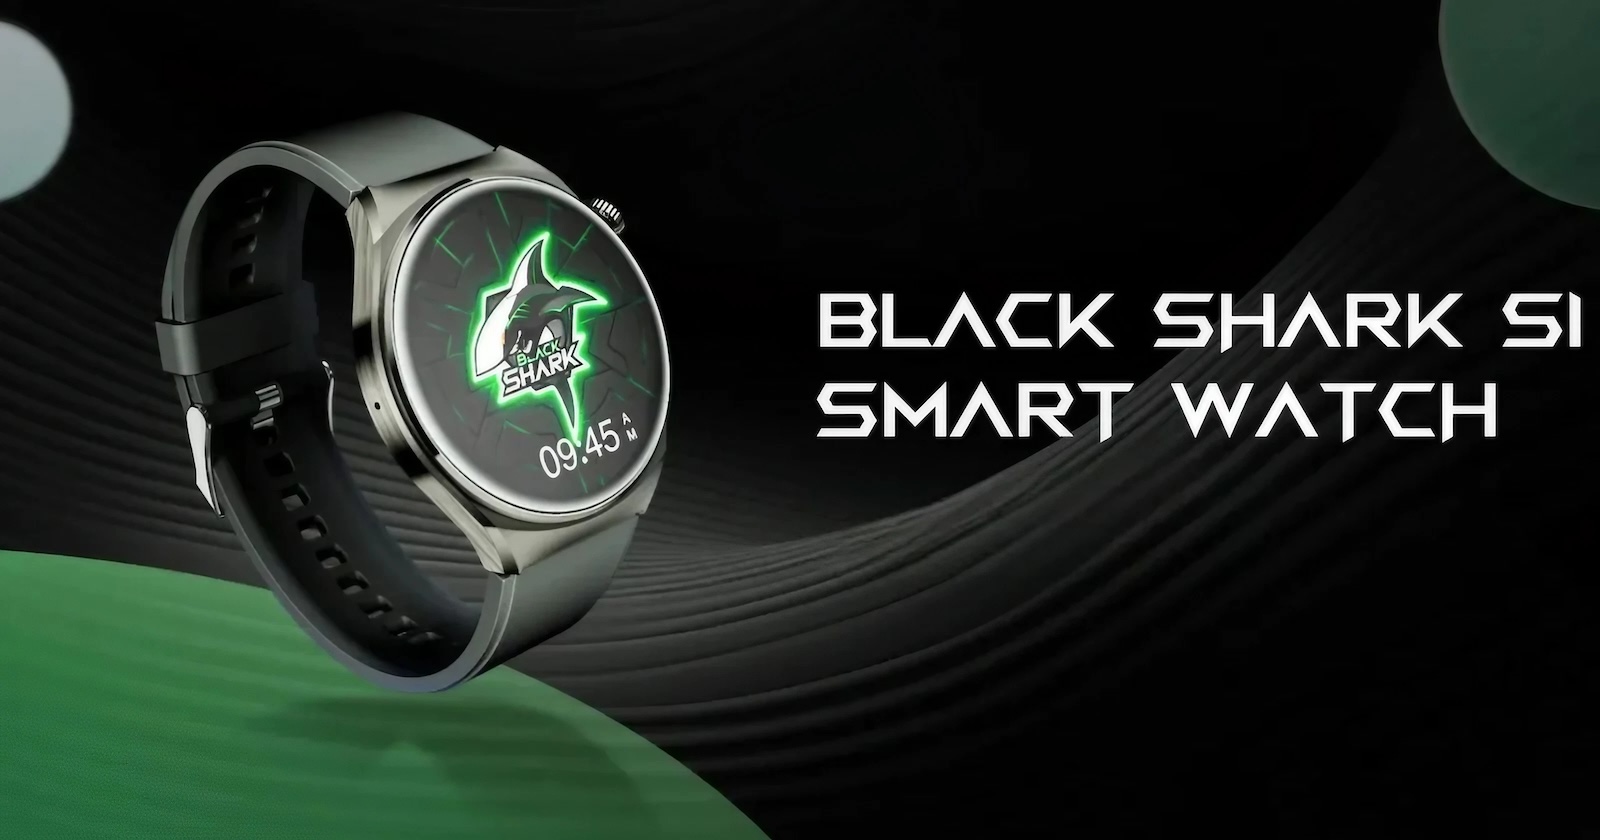 $50 smartwatch from Xiaomi: Black Shark S1 introduced!